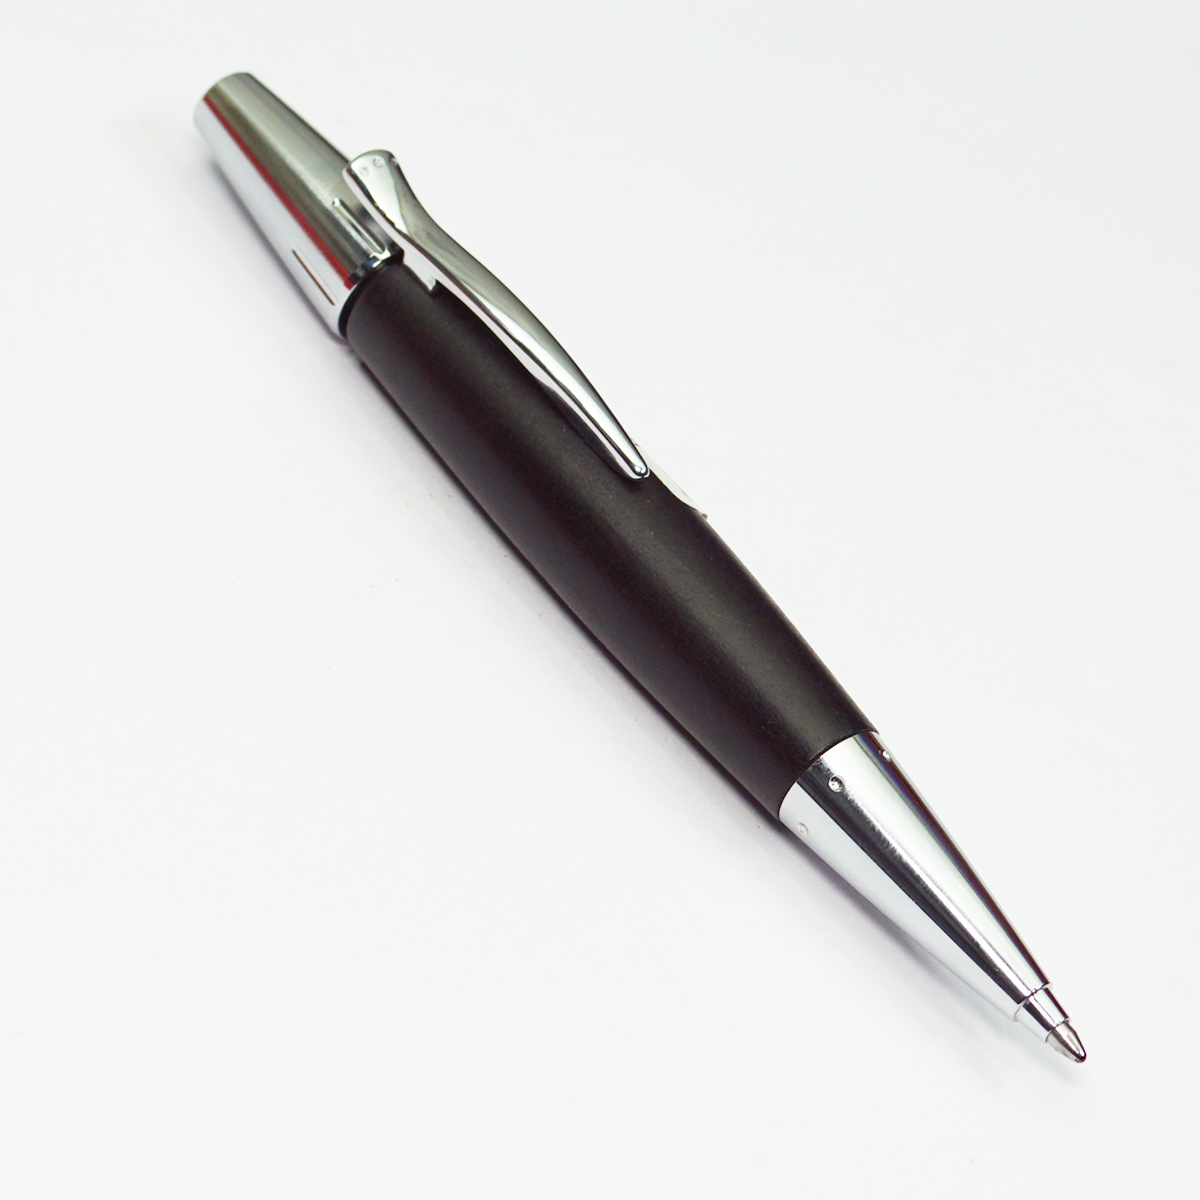 Faber Castell Black Color Body With Silver Clip And Silver Grip Medium Tip Twist Type Ball Pen SKU 23014